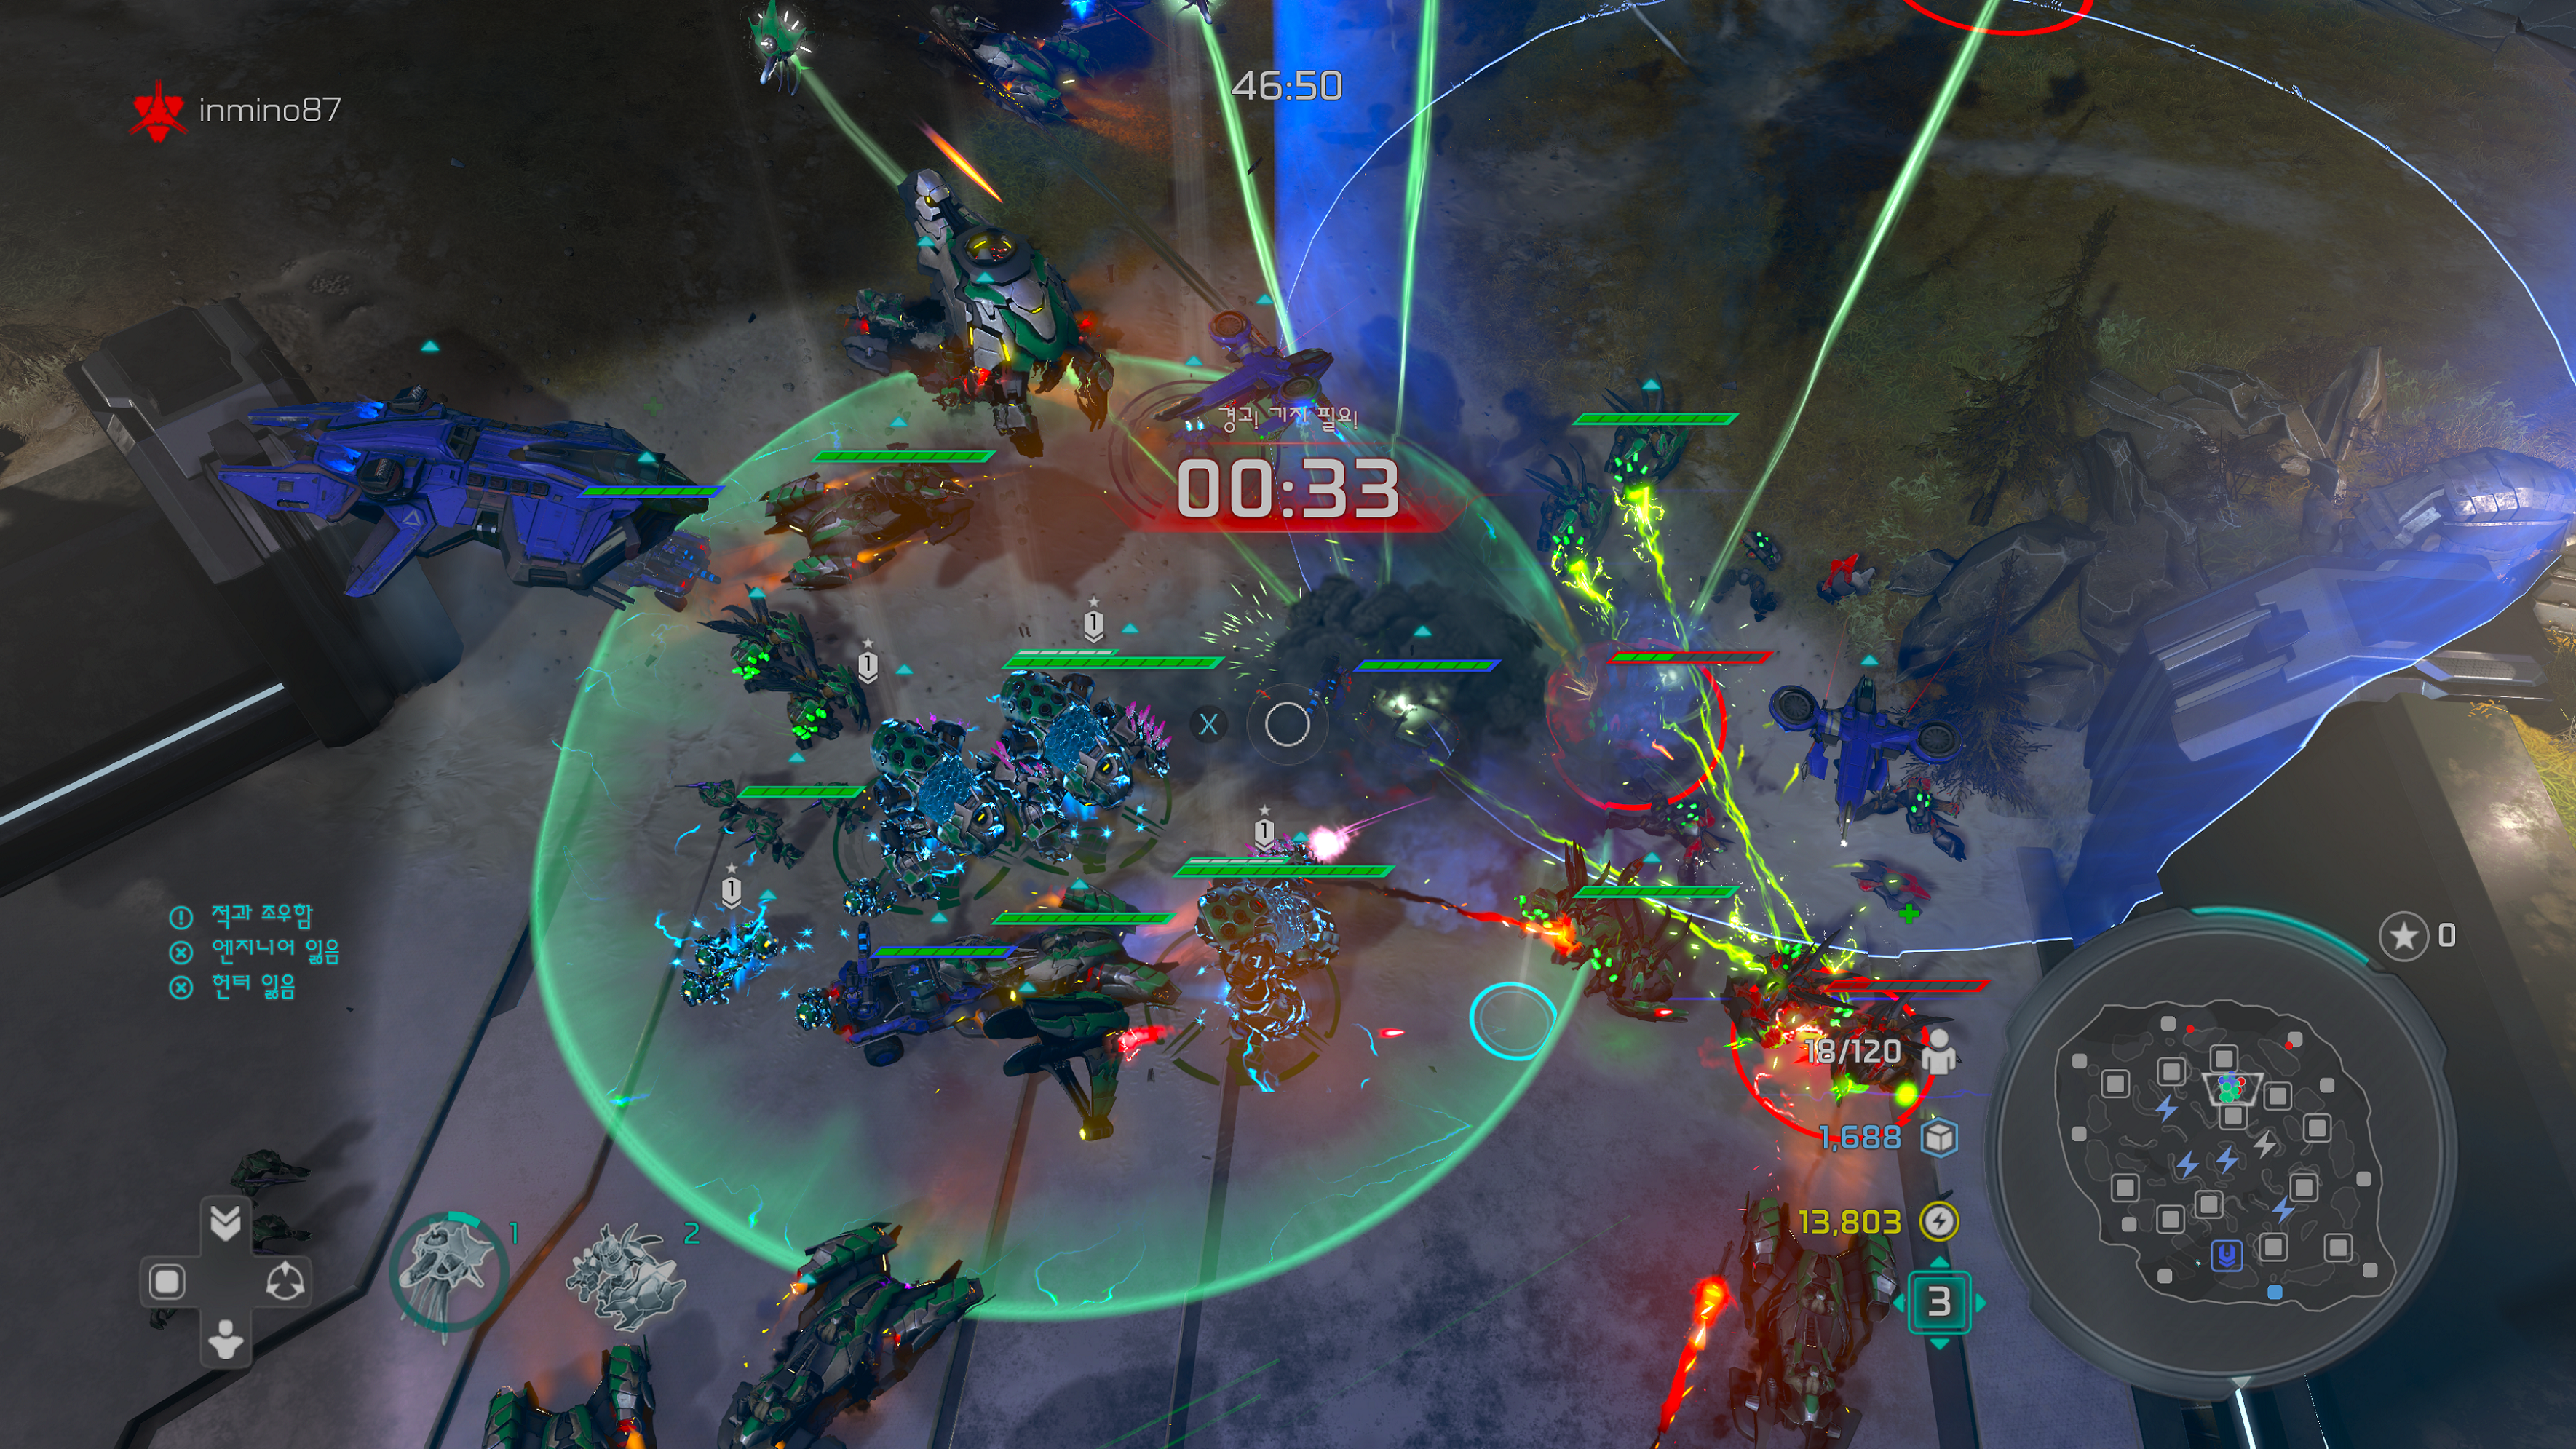 Halo Wars 2 2020-07-28 22-09-41.png